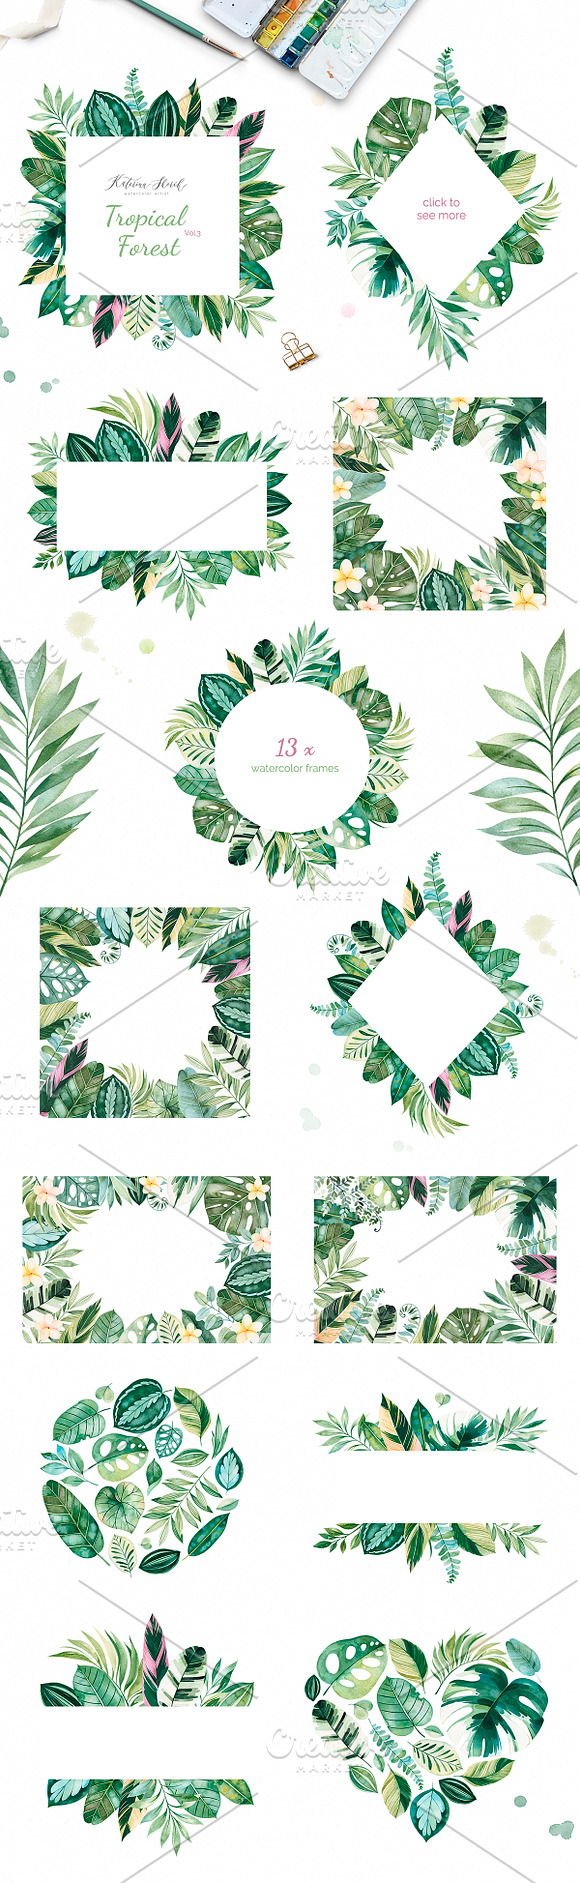 Tropical Forest. Vol.3 in Illustrations - product preview 2